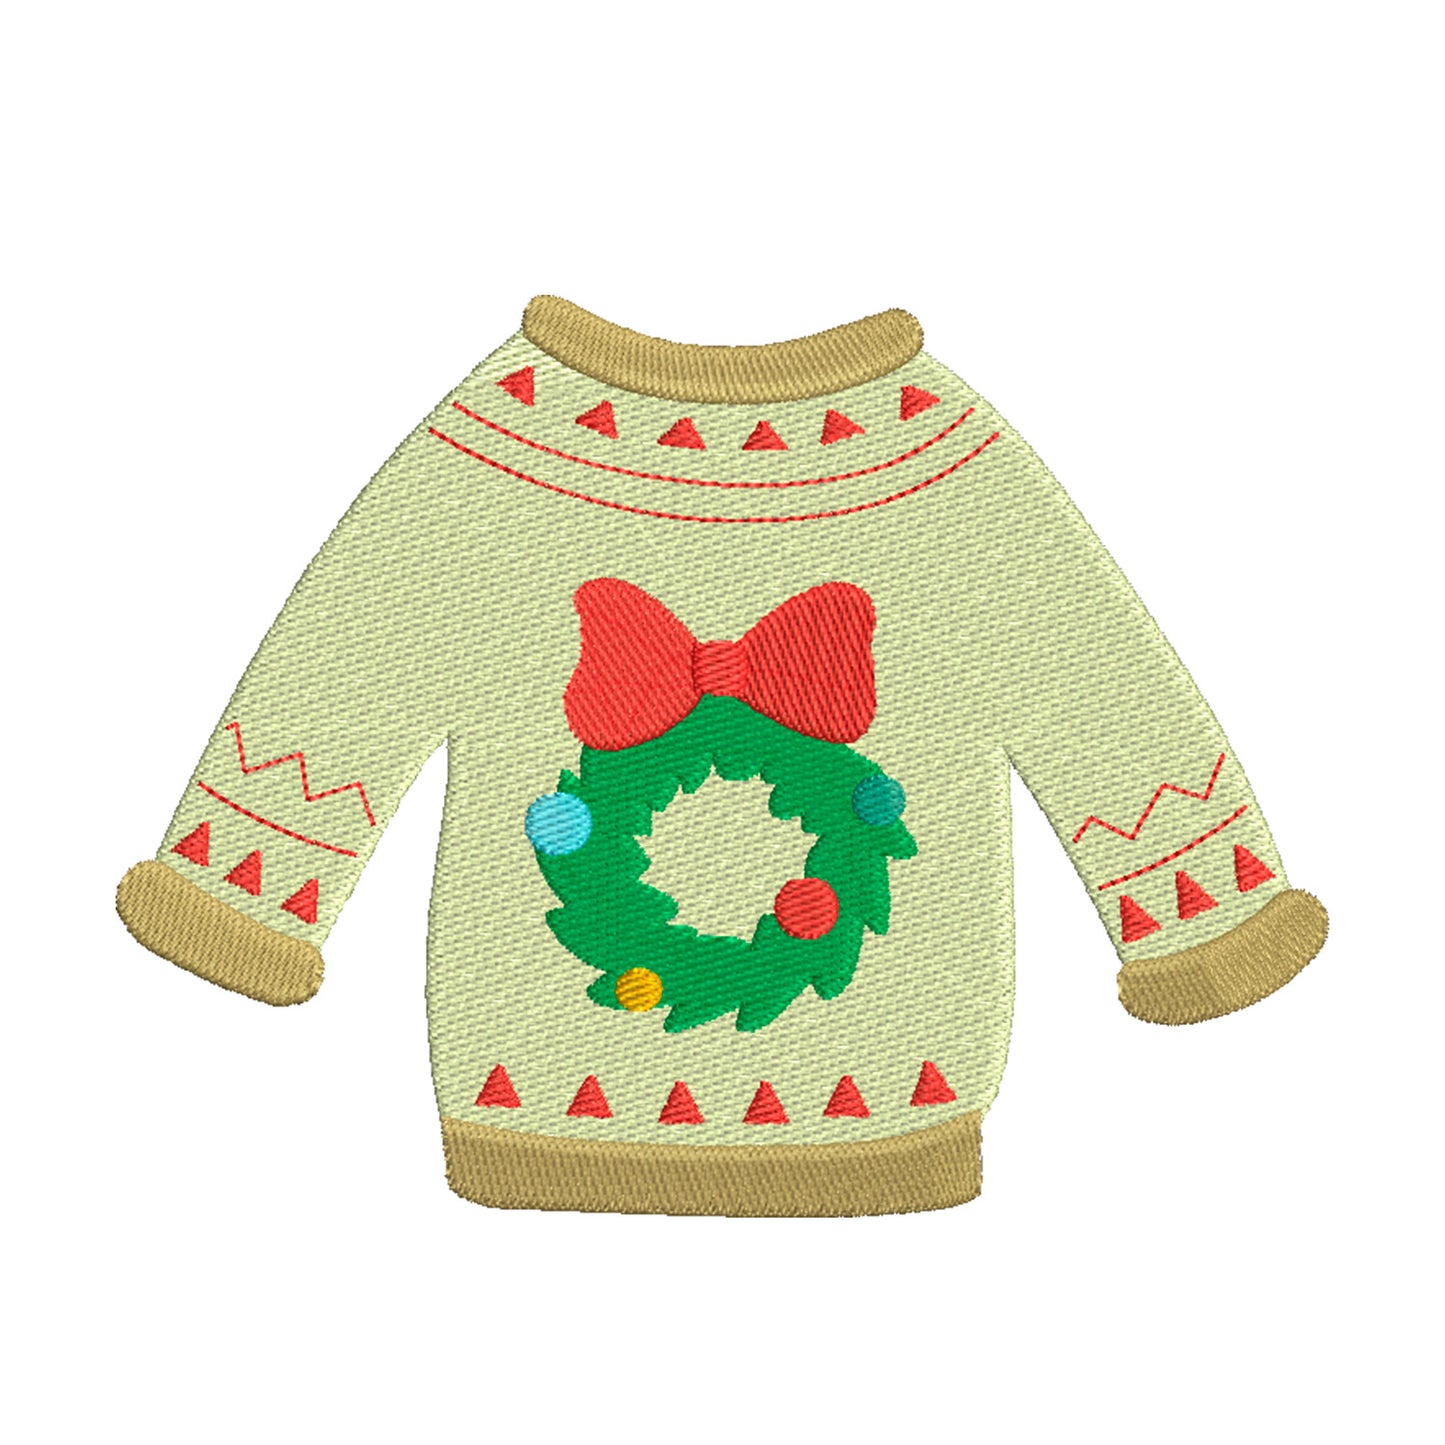 Embroidery designs christmas sweater wreath - 910101